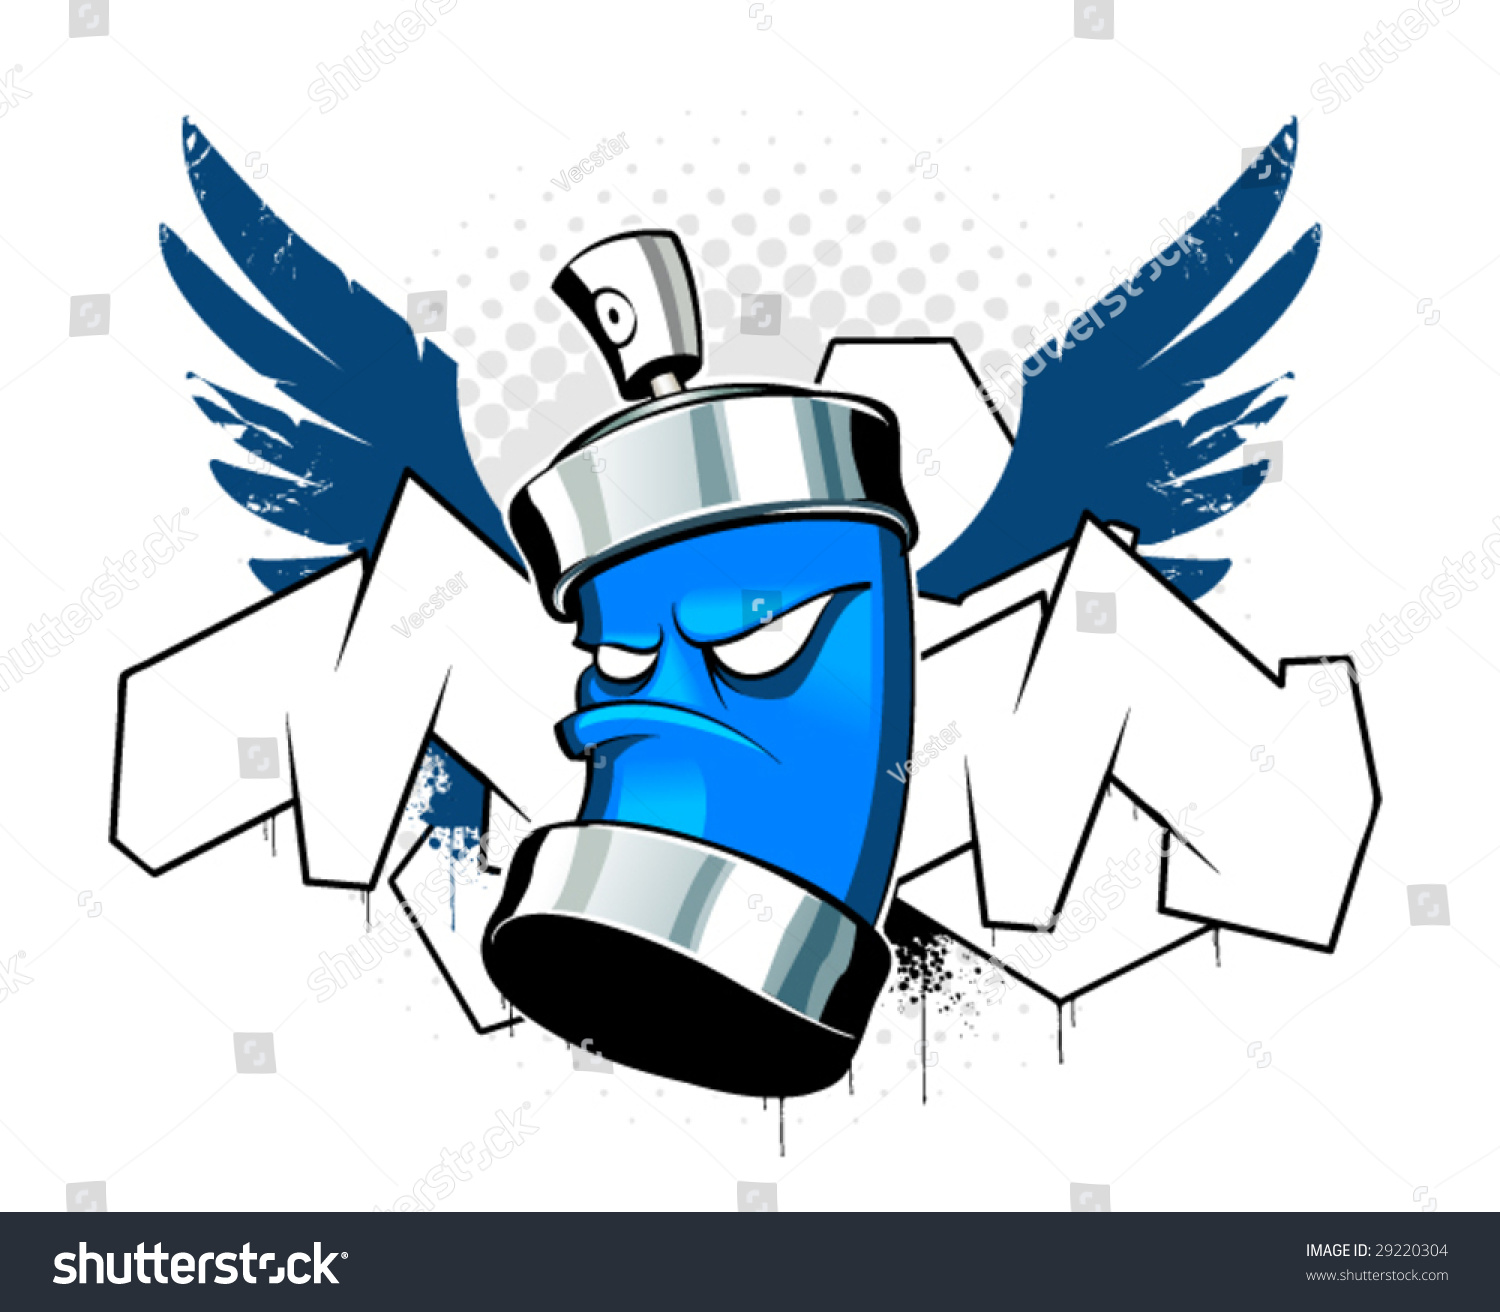 Cool Can Wings On Graffiti Background Stock Vector 29220304 - Shutterstock